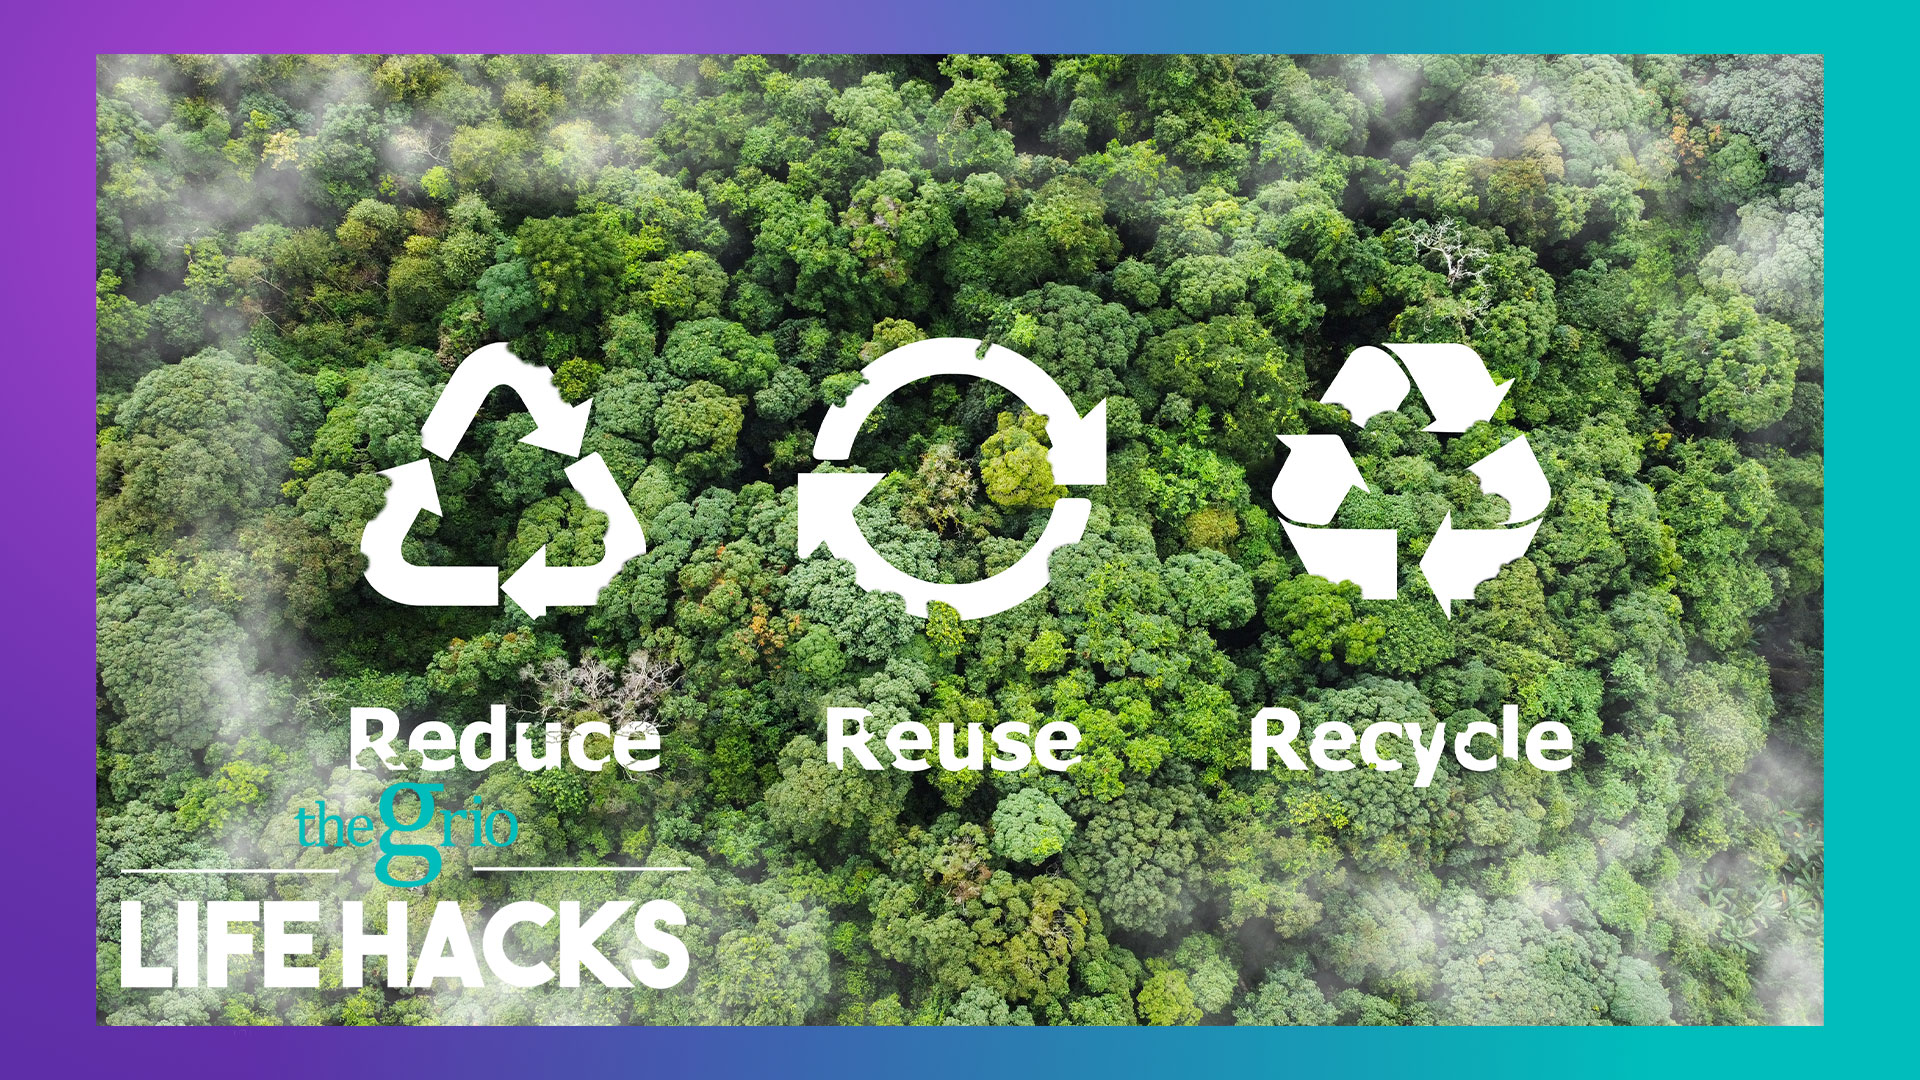 Watch: Simple ways to improve the Environment | Life Hacks